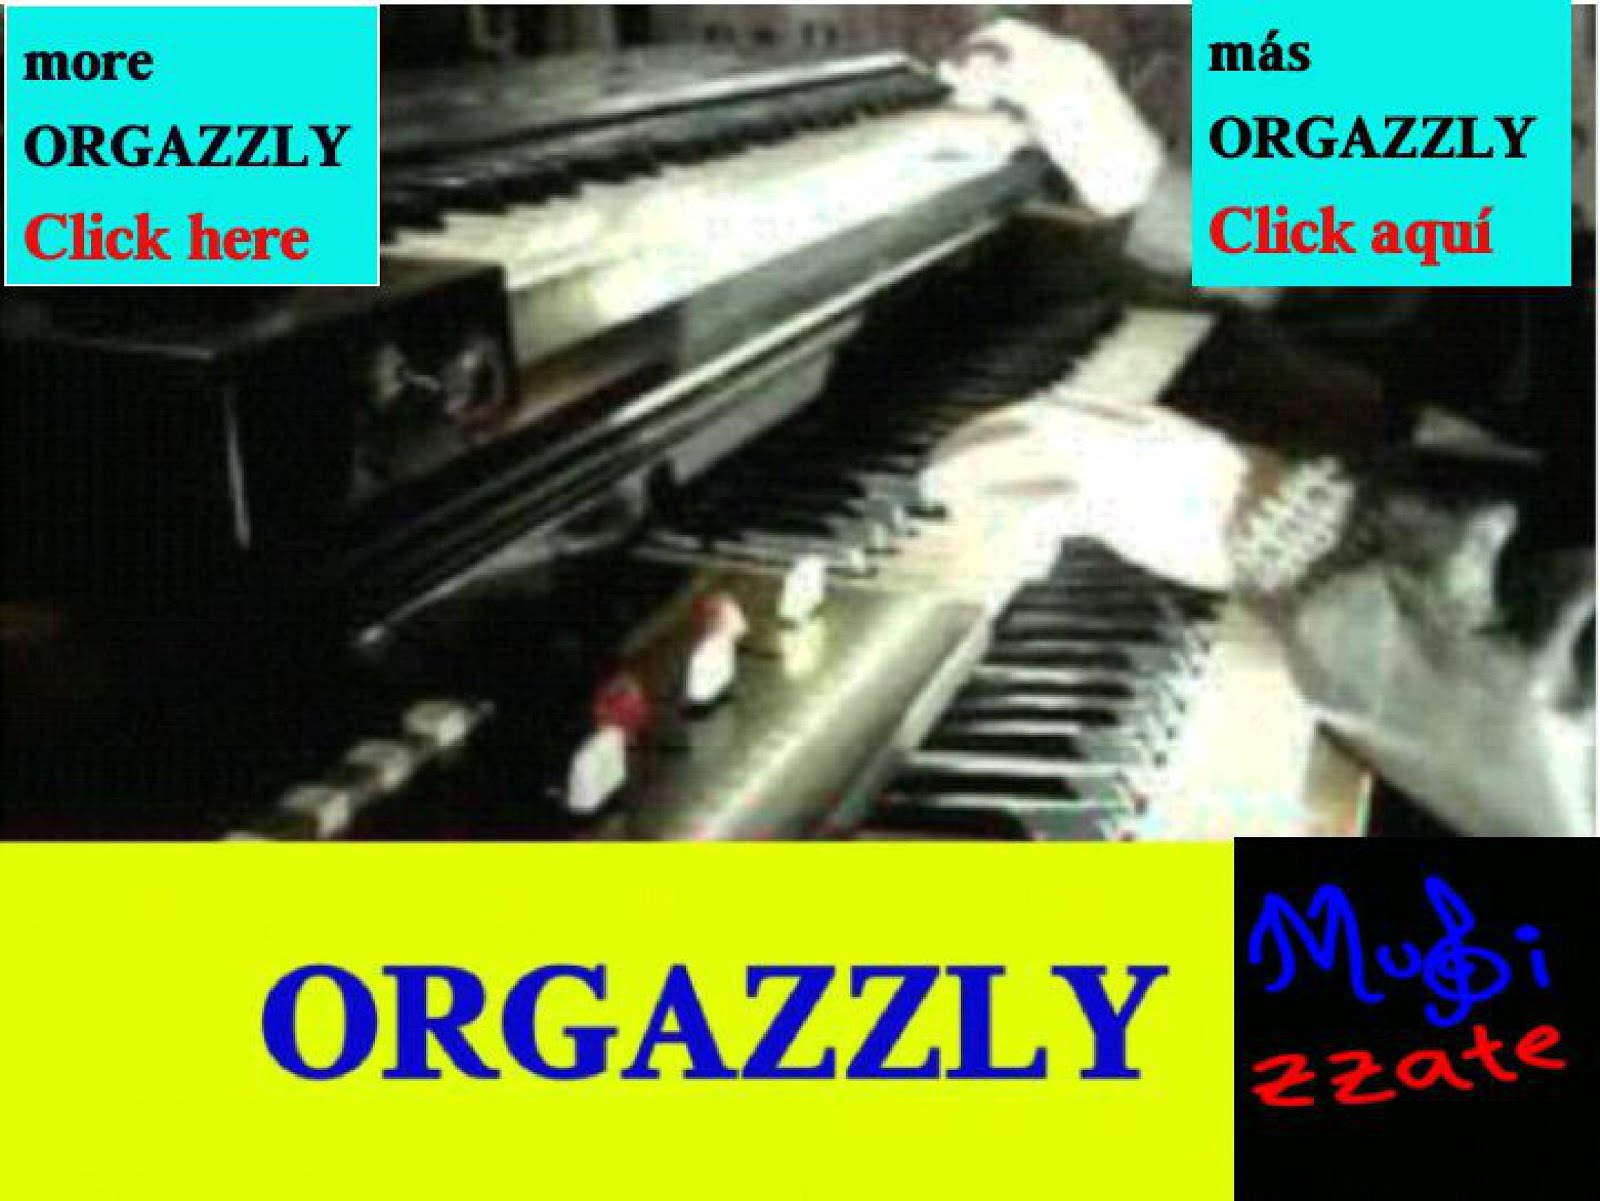 more ORGAZZLY music, access here